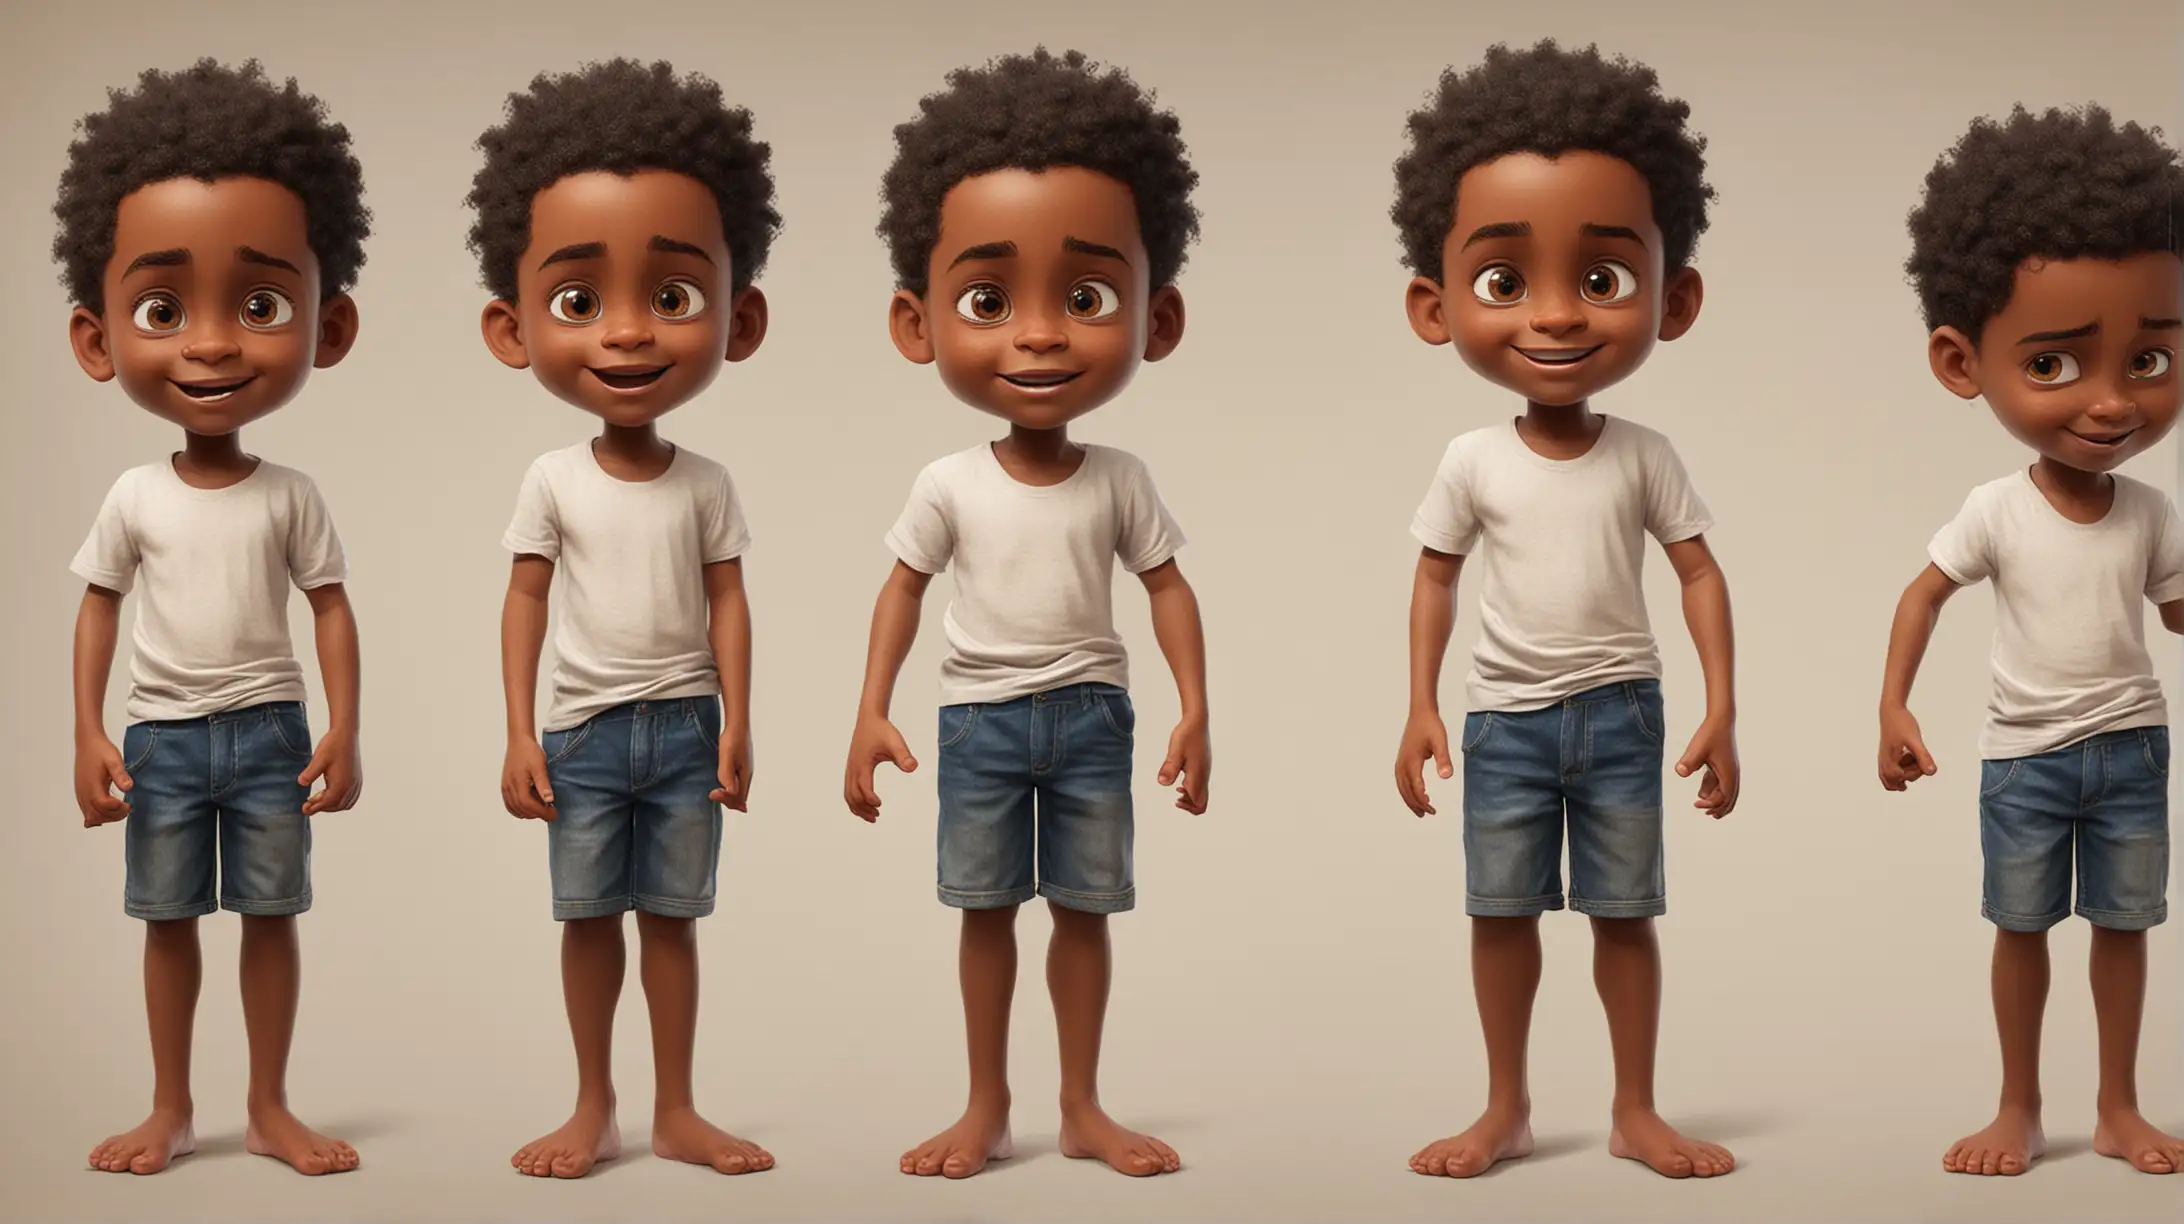 Create a kids book character pack with different facial expressions and different feet and hand gestures of a black African boy aged 5 